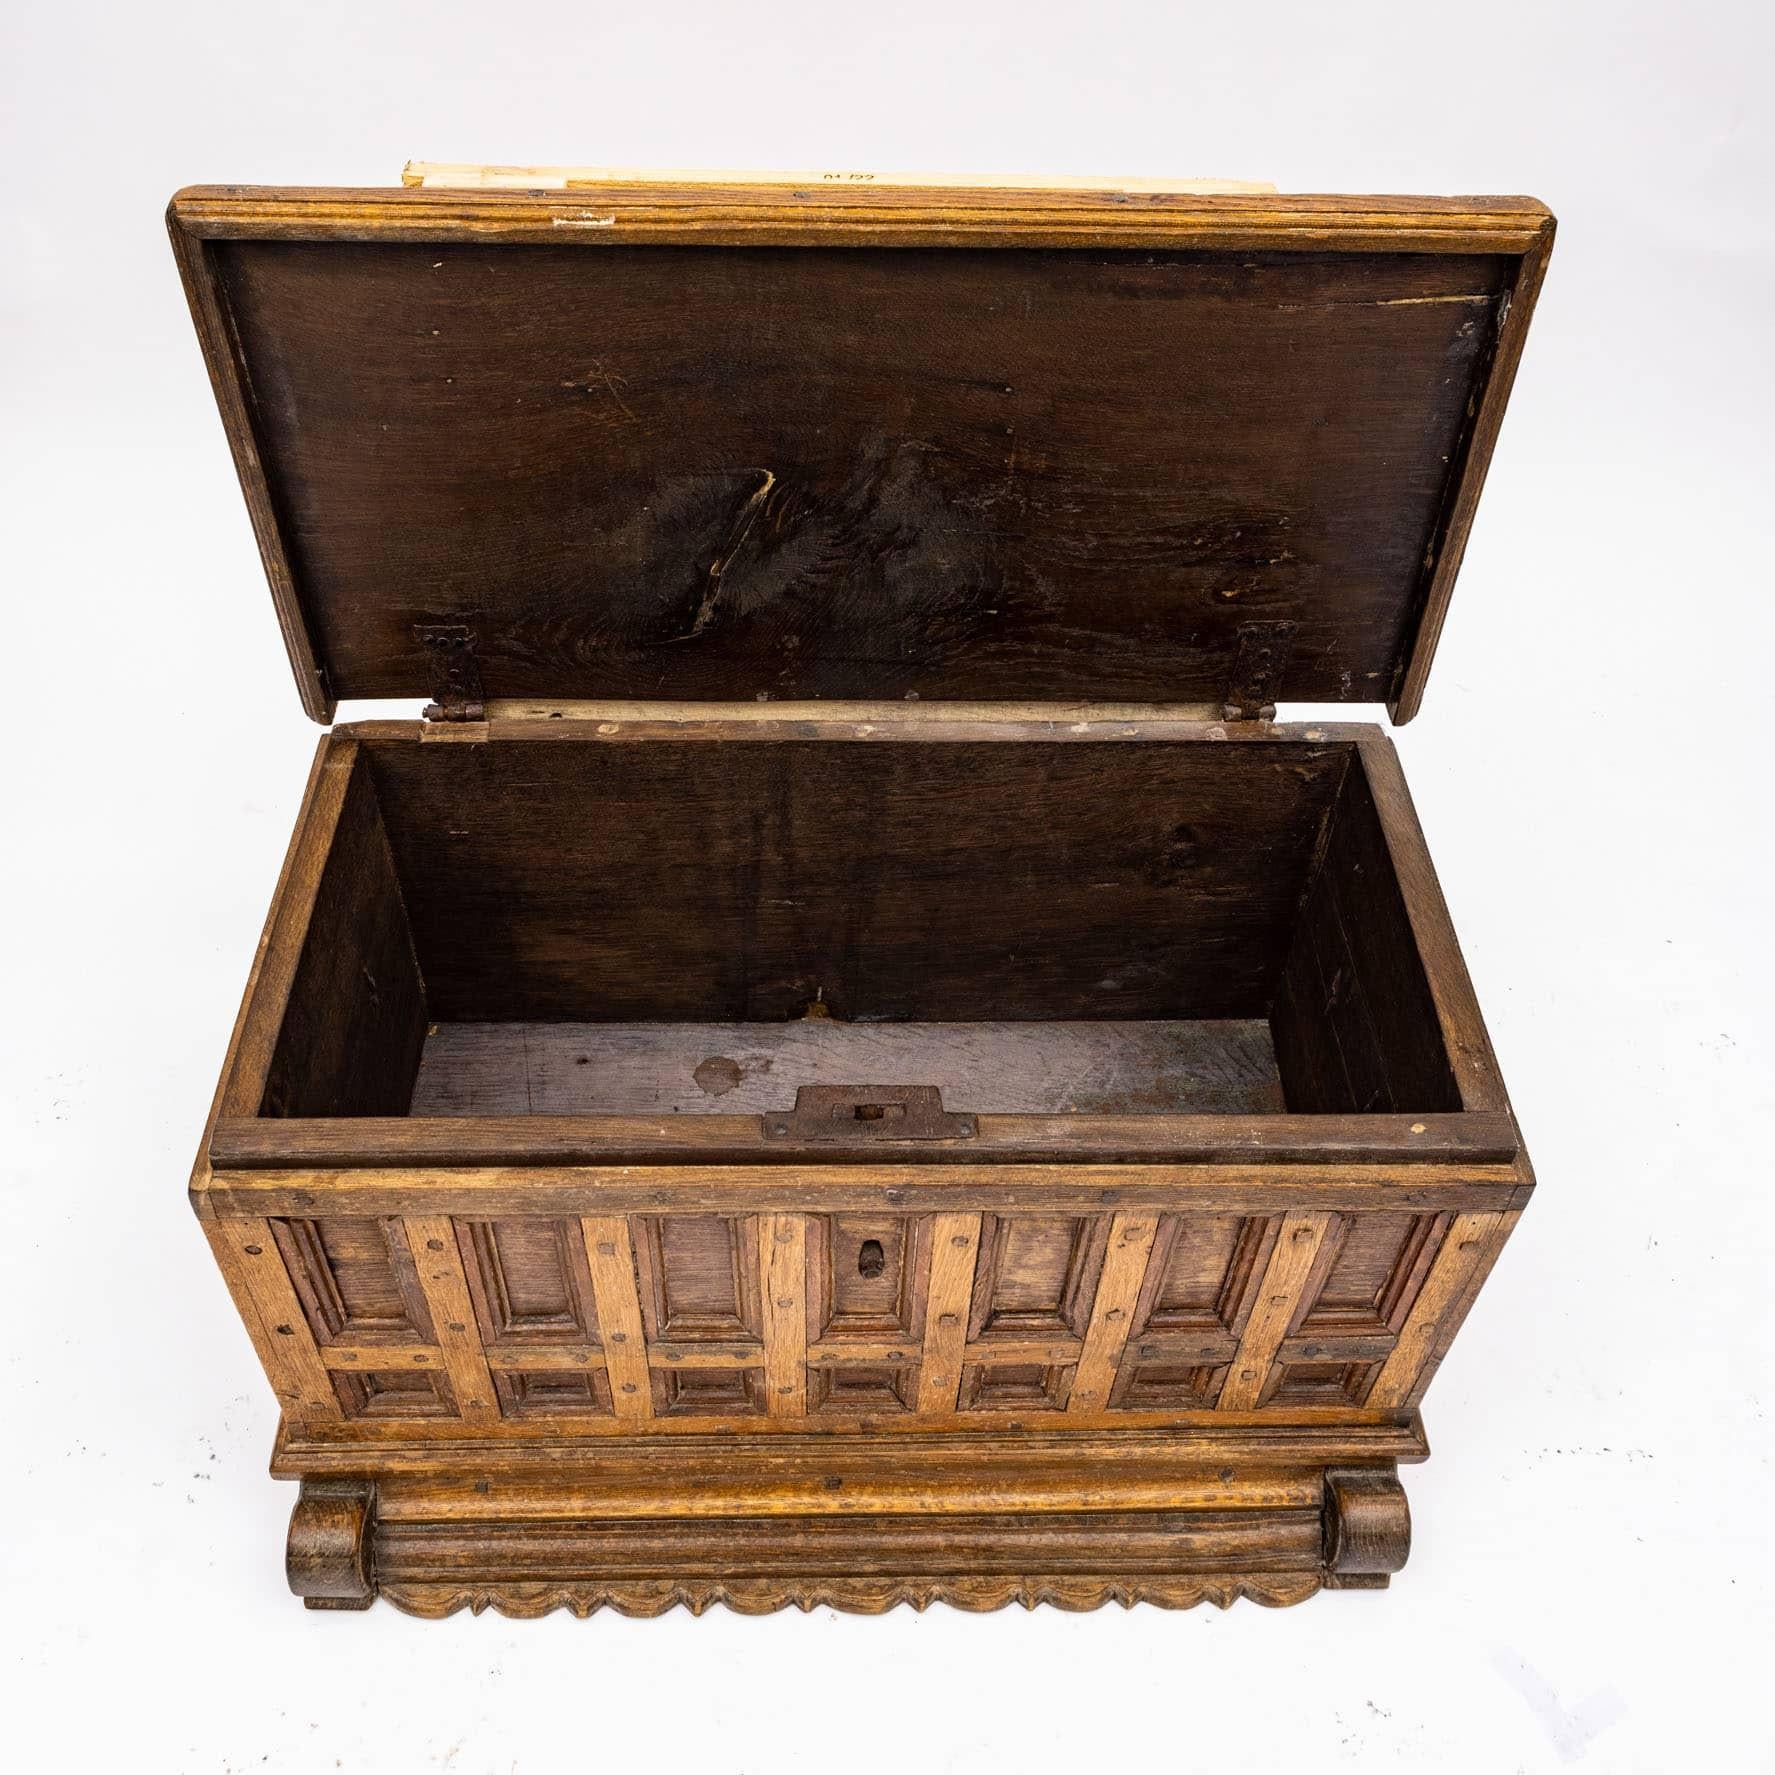 Small renaissance Oak chest.
Front with profiled fillings. Handles made in cast iron.
Original lock ( No key ).

Charming chest in original untouched condition.

Denmark 17th century.